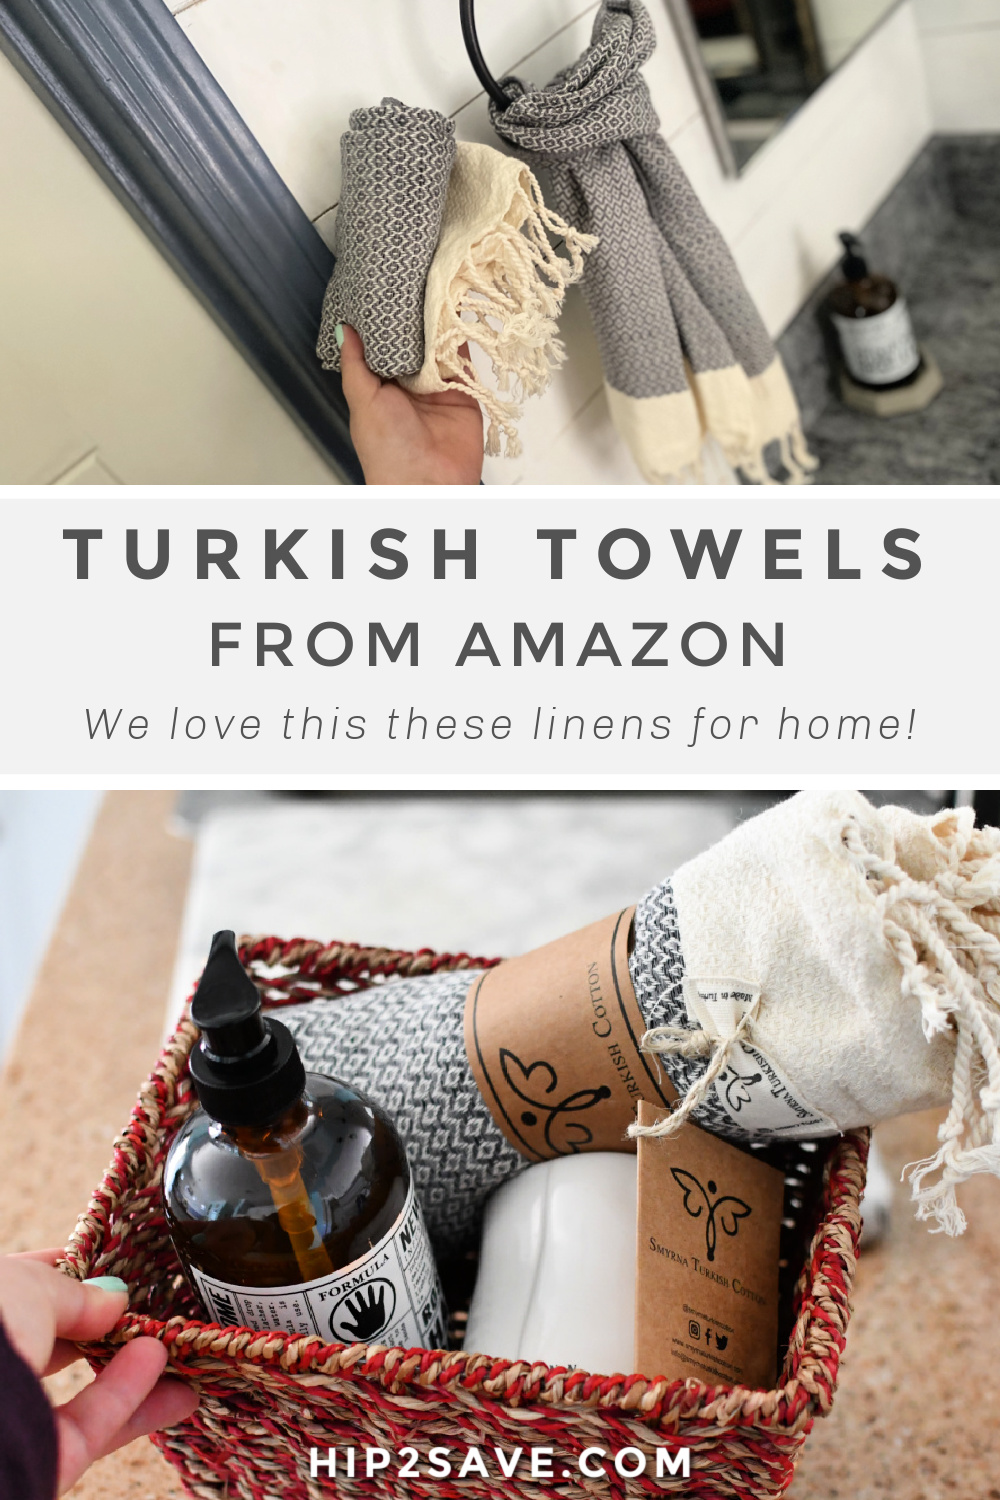 SMYRNA TURKISH COTTON Original Series Hand Towels - Set of 2, 16 x 40 in, 100% Turkish Cotton, Large, Soft Hand and Head Towels for Bathroom, Kitchen, No Shrink